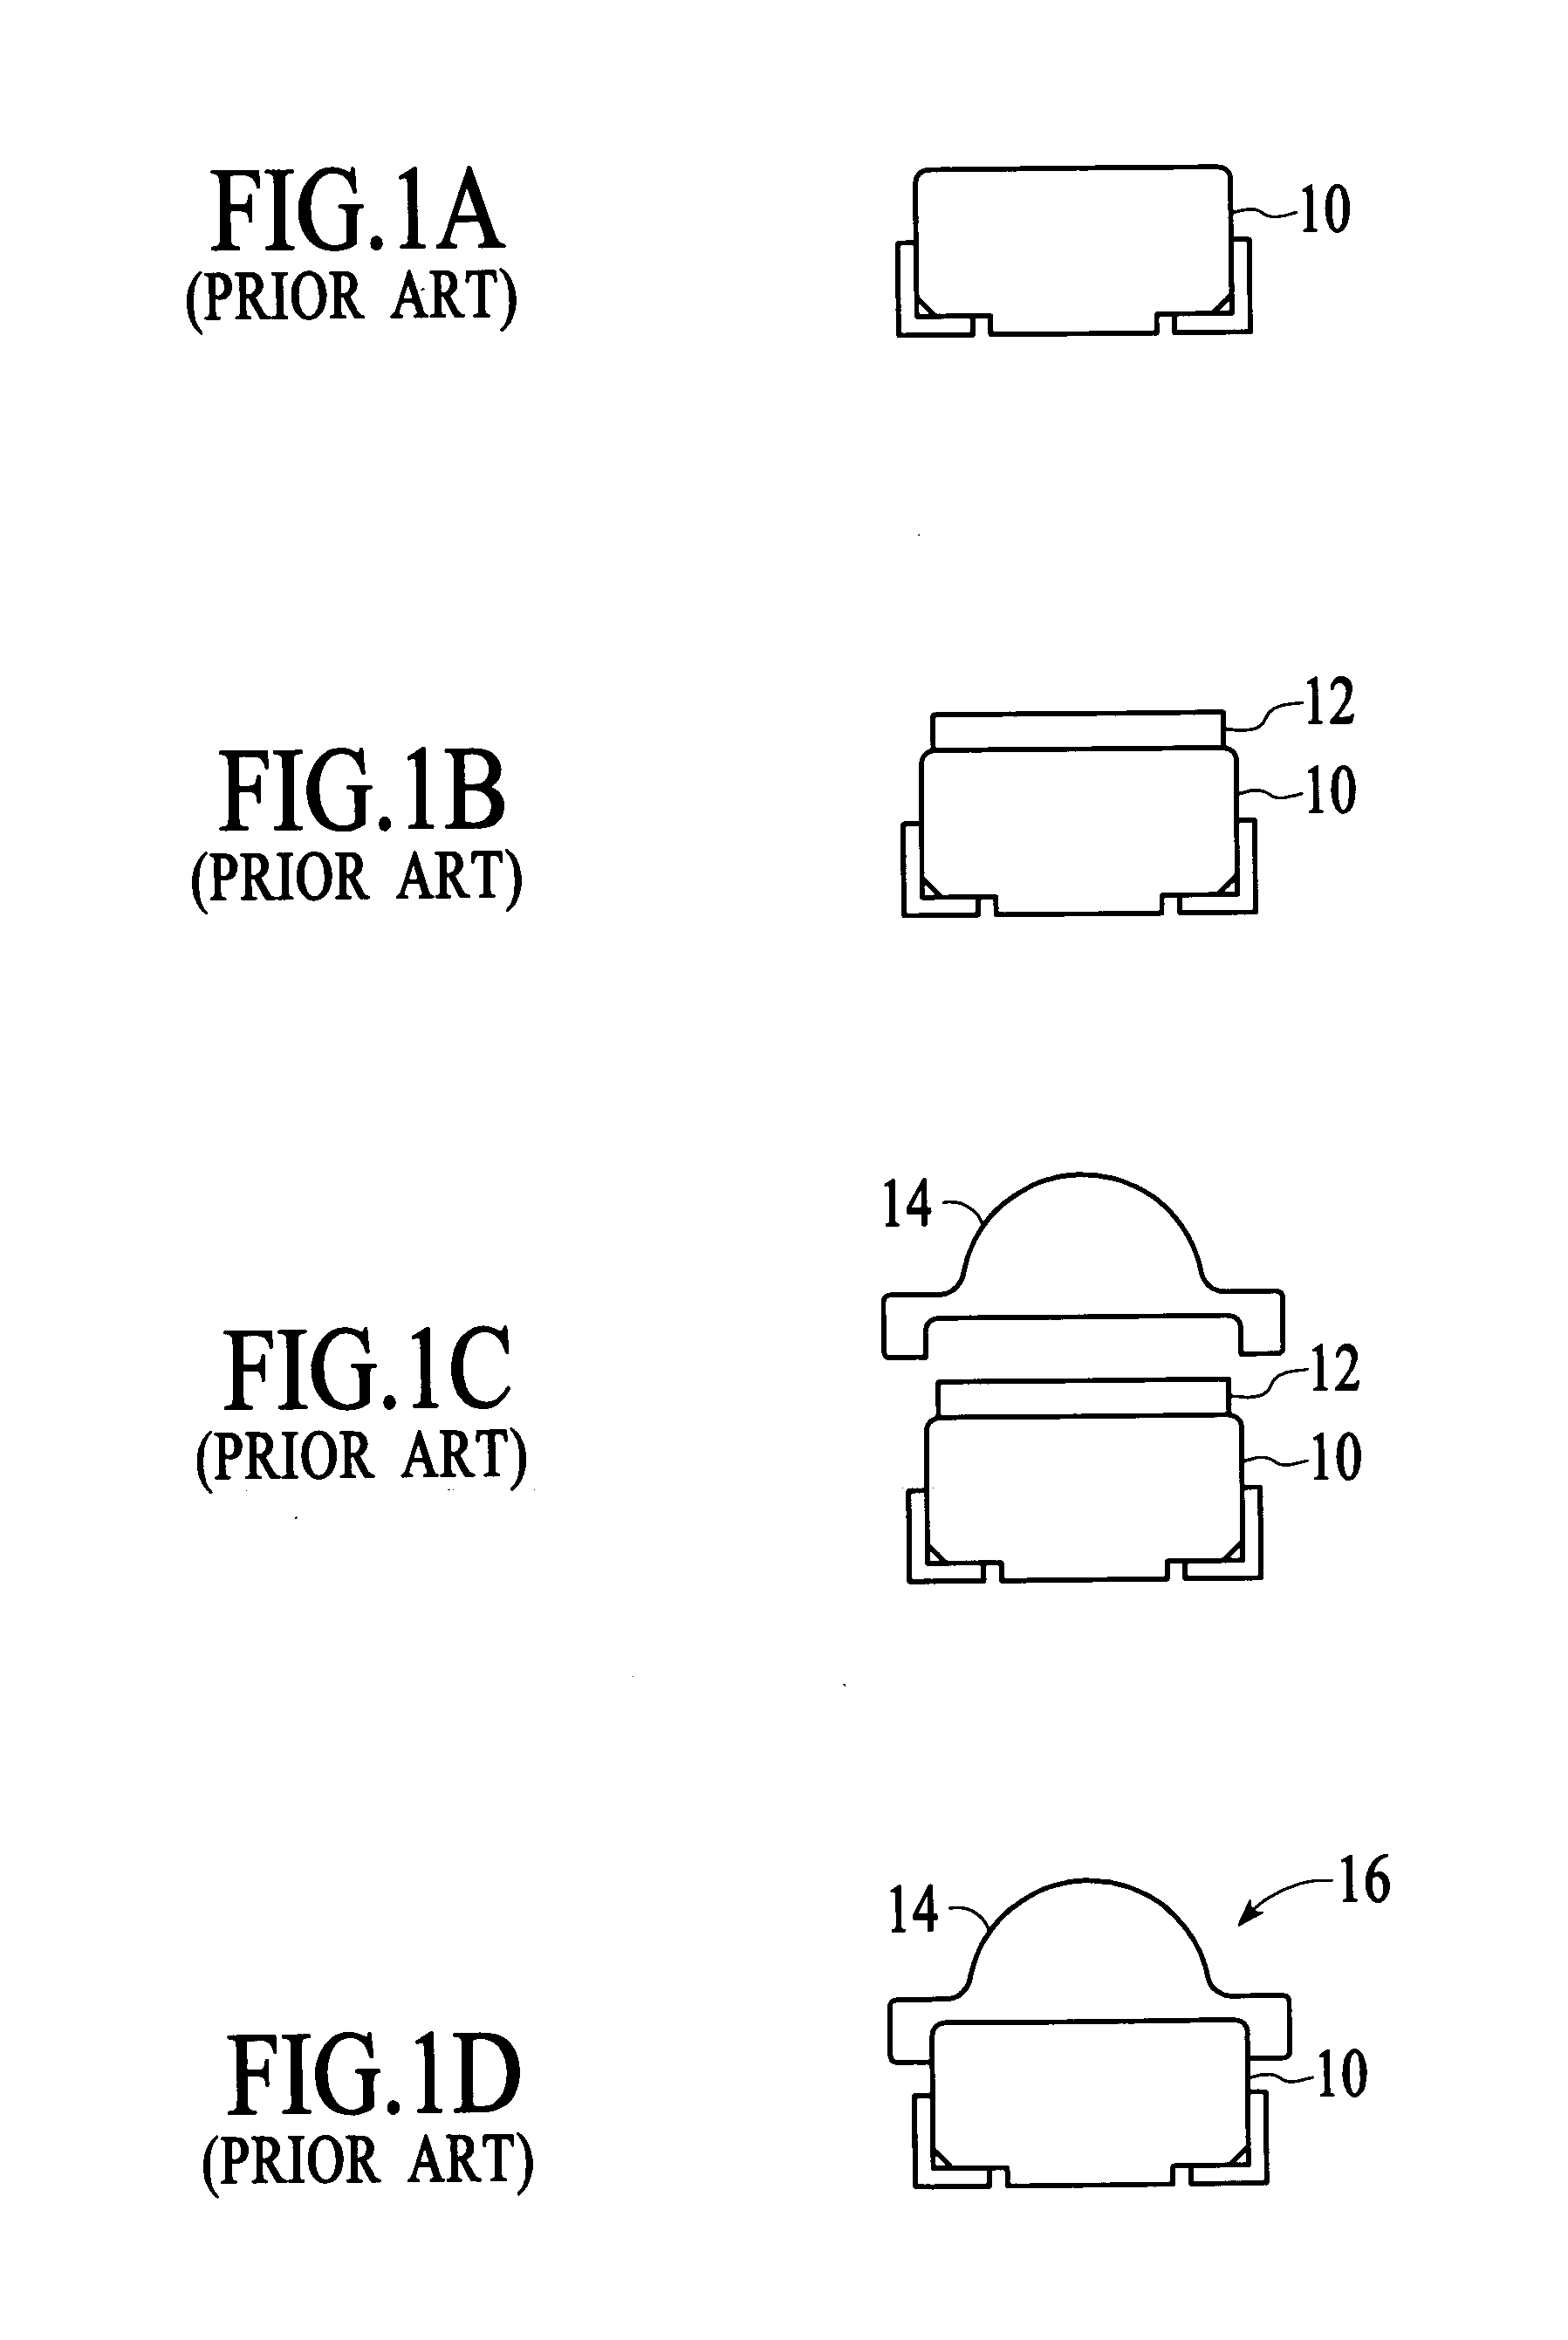 PLCC package with integrated lens and method for making the package